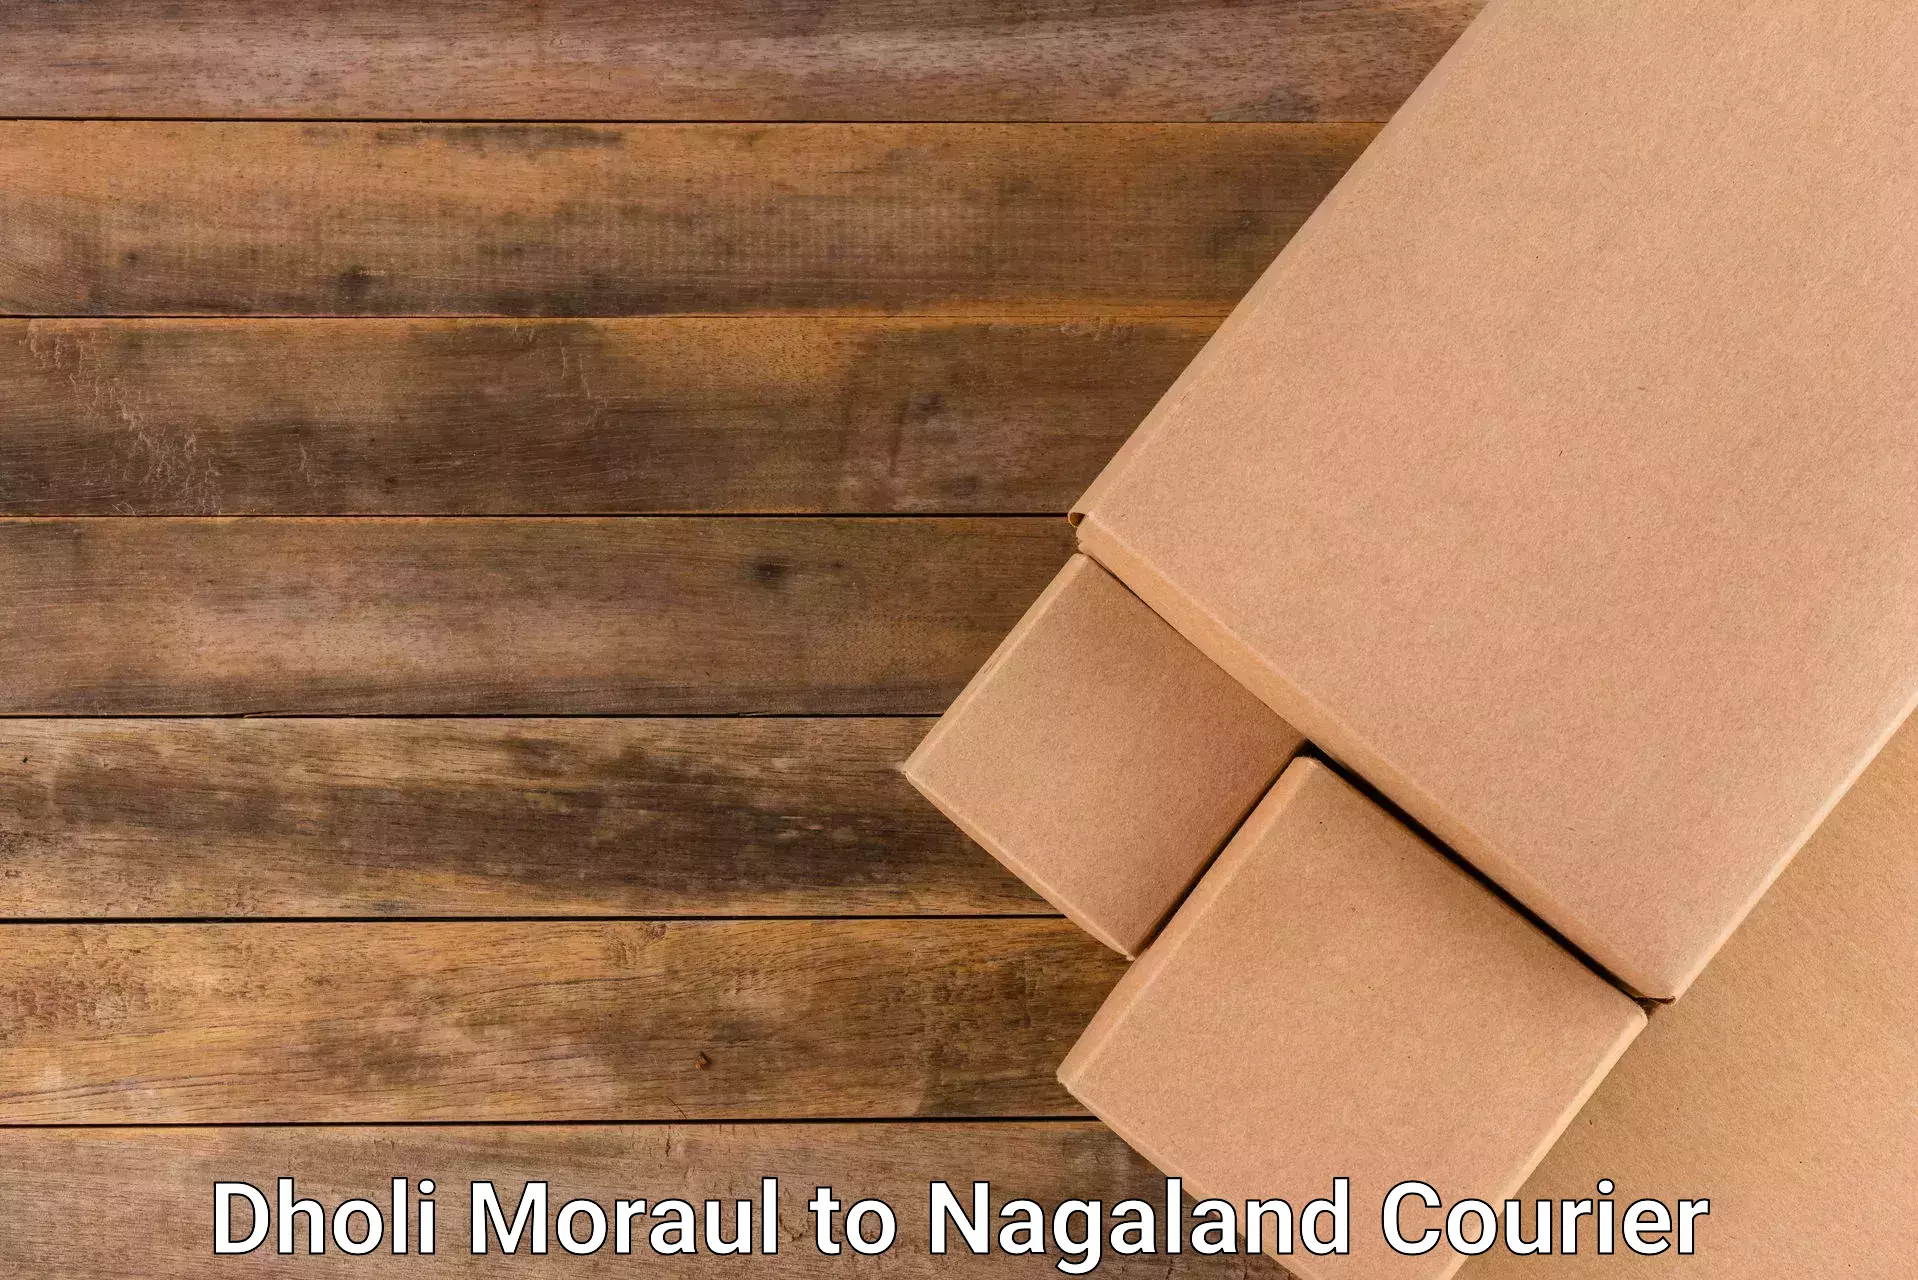 End-to-end delivery Dholi Moraul to Nagaland